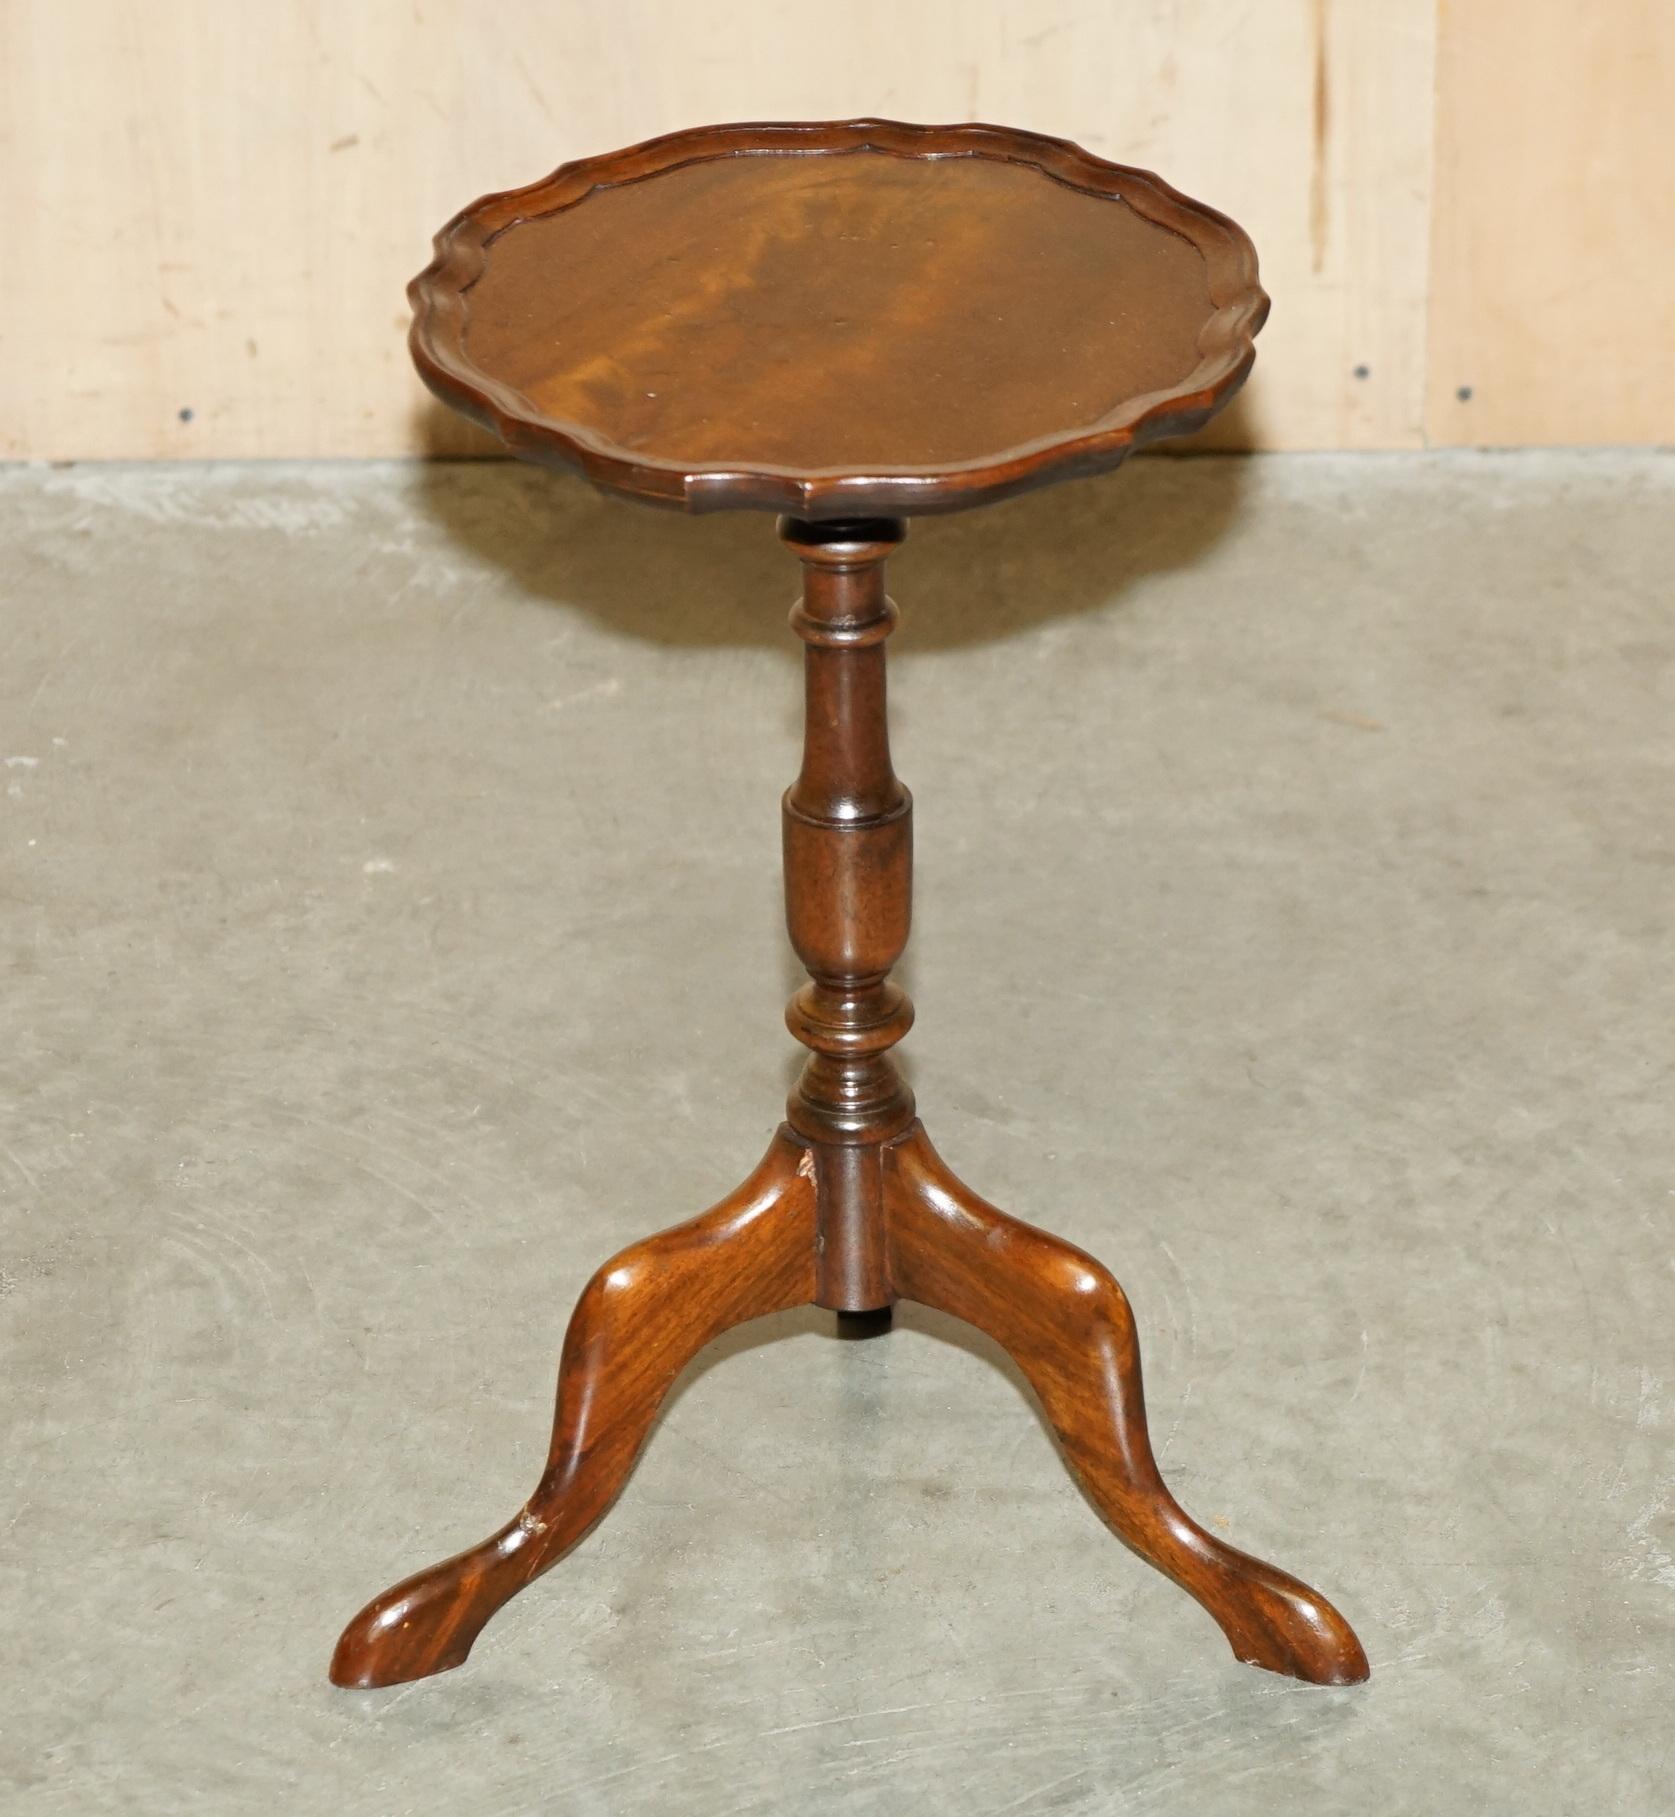 Royal House Antiques

Royal House Antiques is delighted to offer for sale this absolutely exquisite, handmade, Flamed Mahogany side end table with a turned column base and pie-crest edge top 

Please note the delivery fee listed is just a guide, it